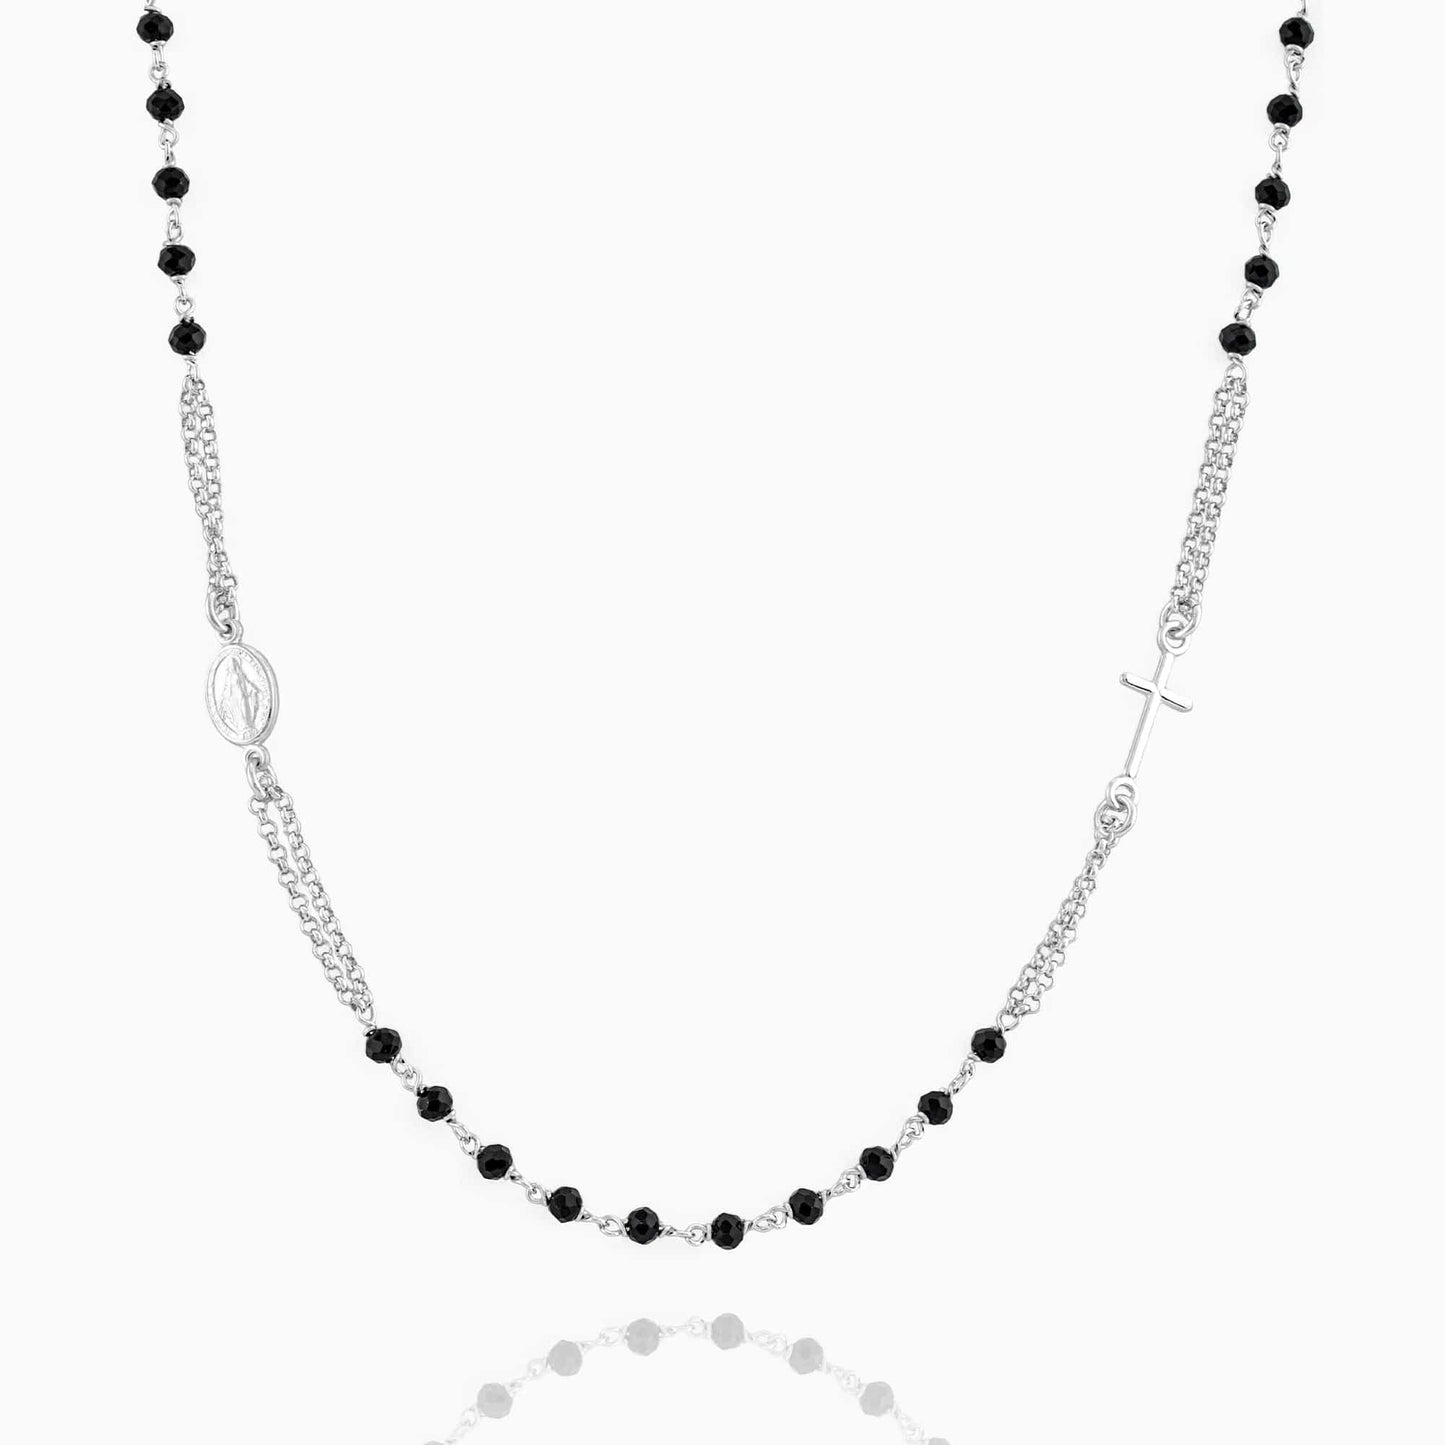 MONDO CATTOLICO Prayer Beads Rhodium / Cm 46+5 (18.1 in+2) STERLING SILVER NECKLACE ROSARY BLACK BEADS